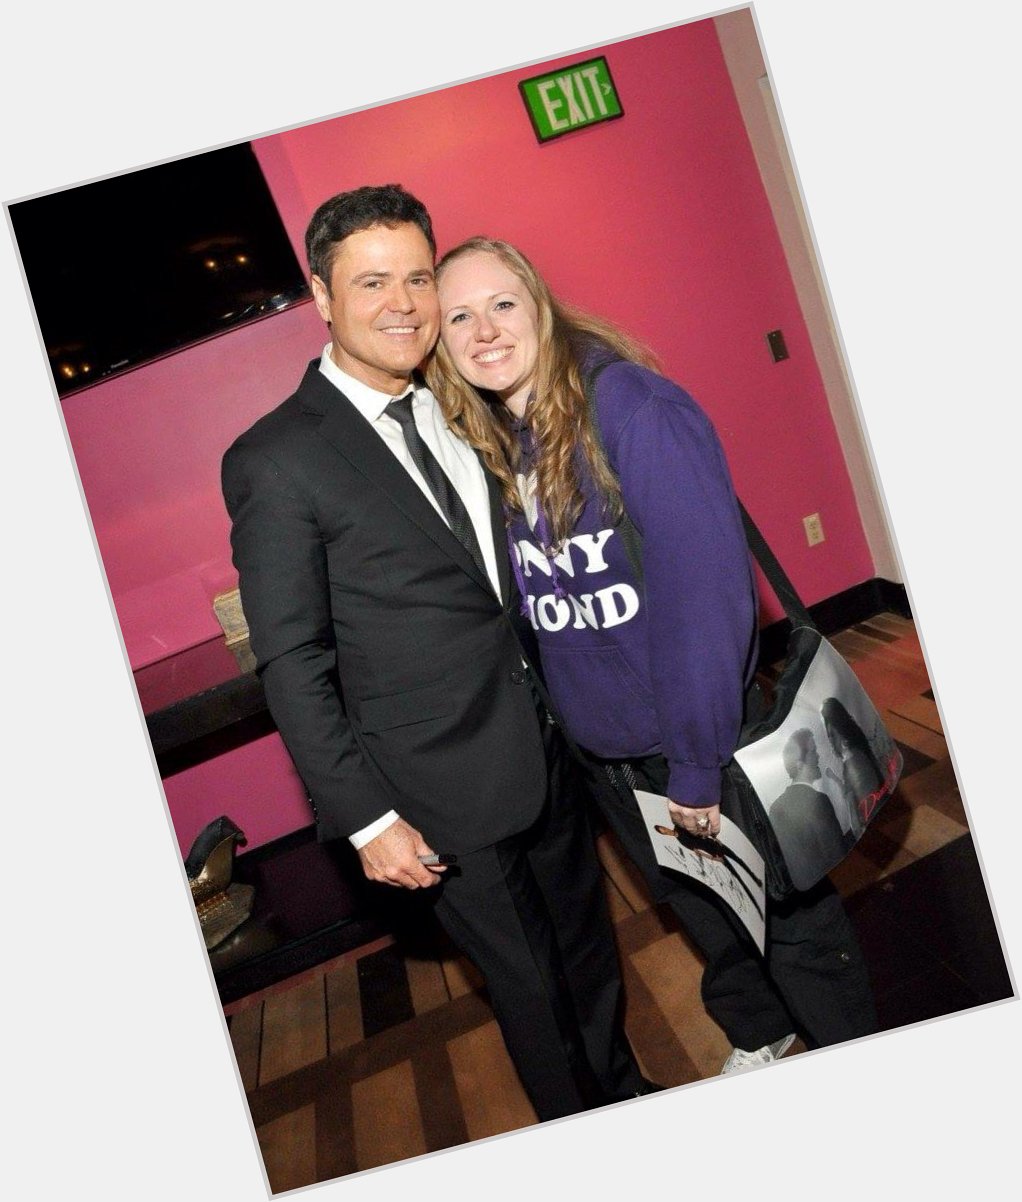 Happy birthday you make me proud everyday to be a Donny Osmond fan! I love you so blooming much. Xxxx 